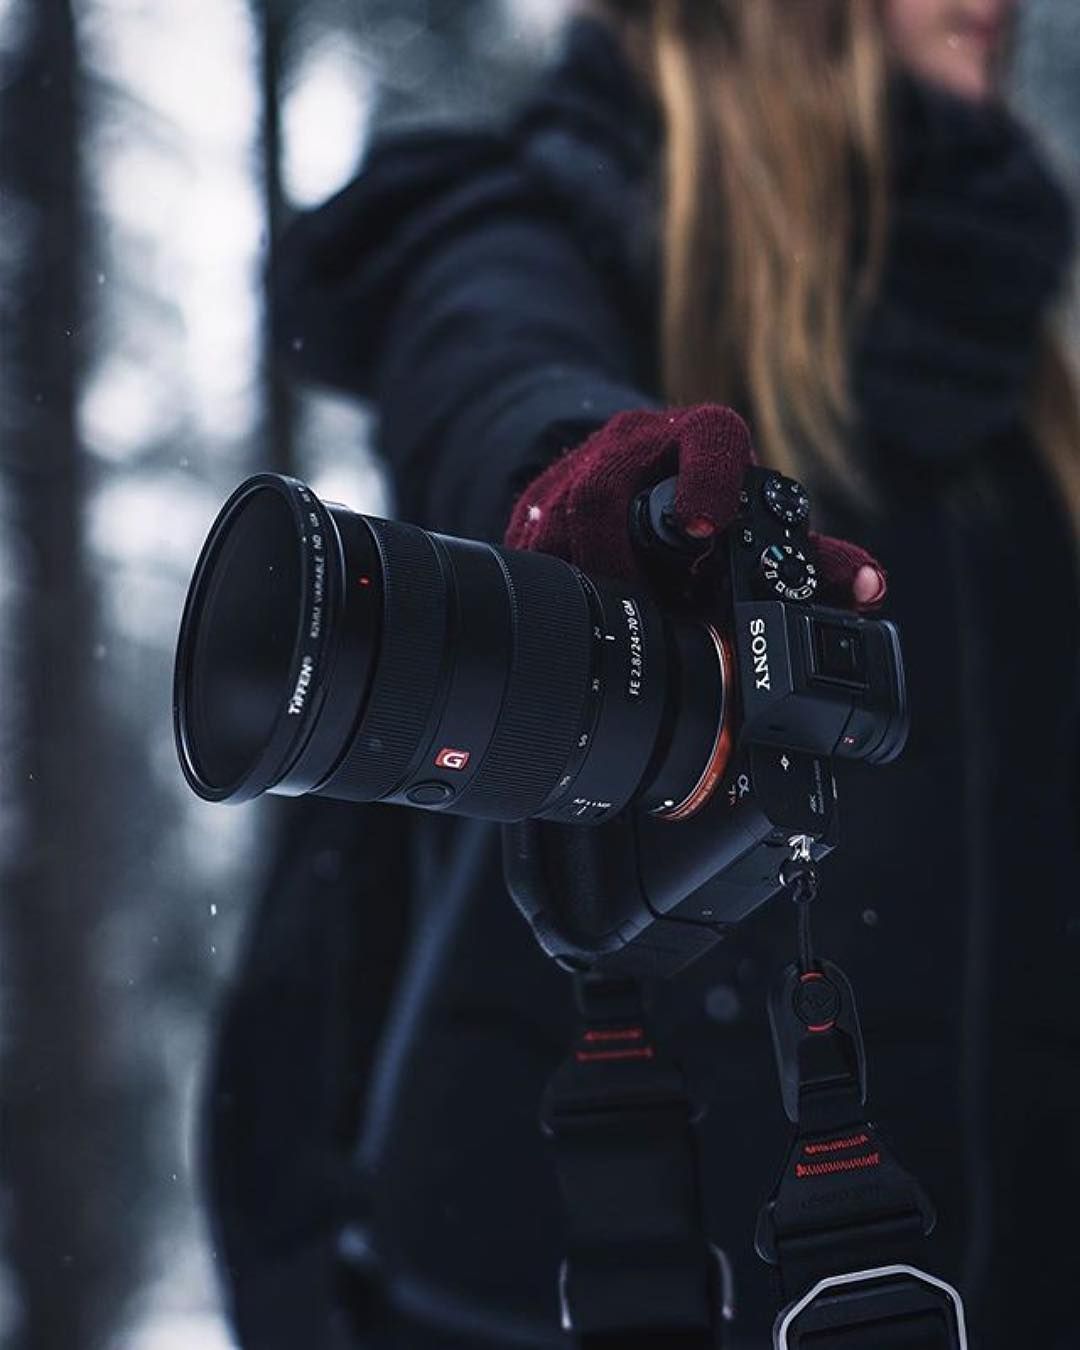 What Are You Shooting Today? Sony A7RII 24 70mm